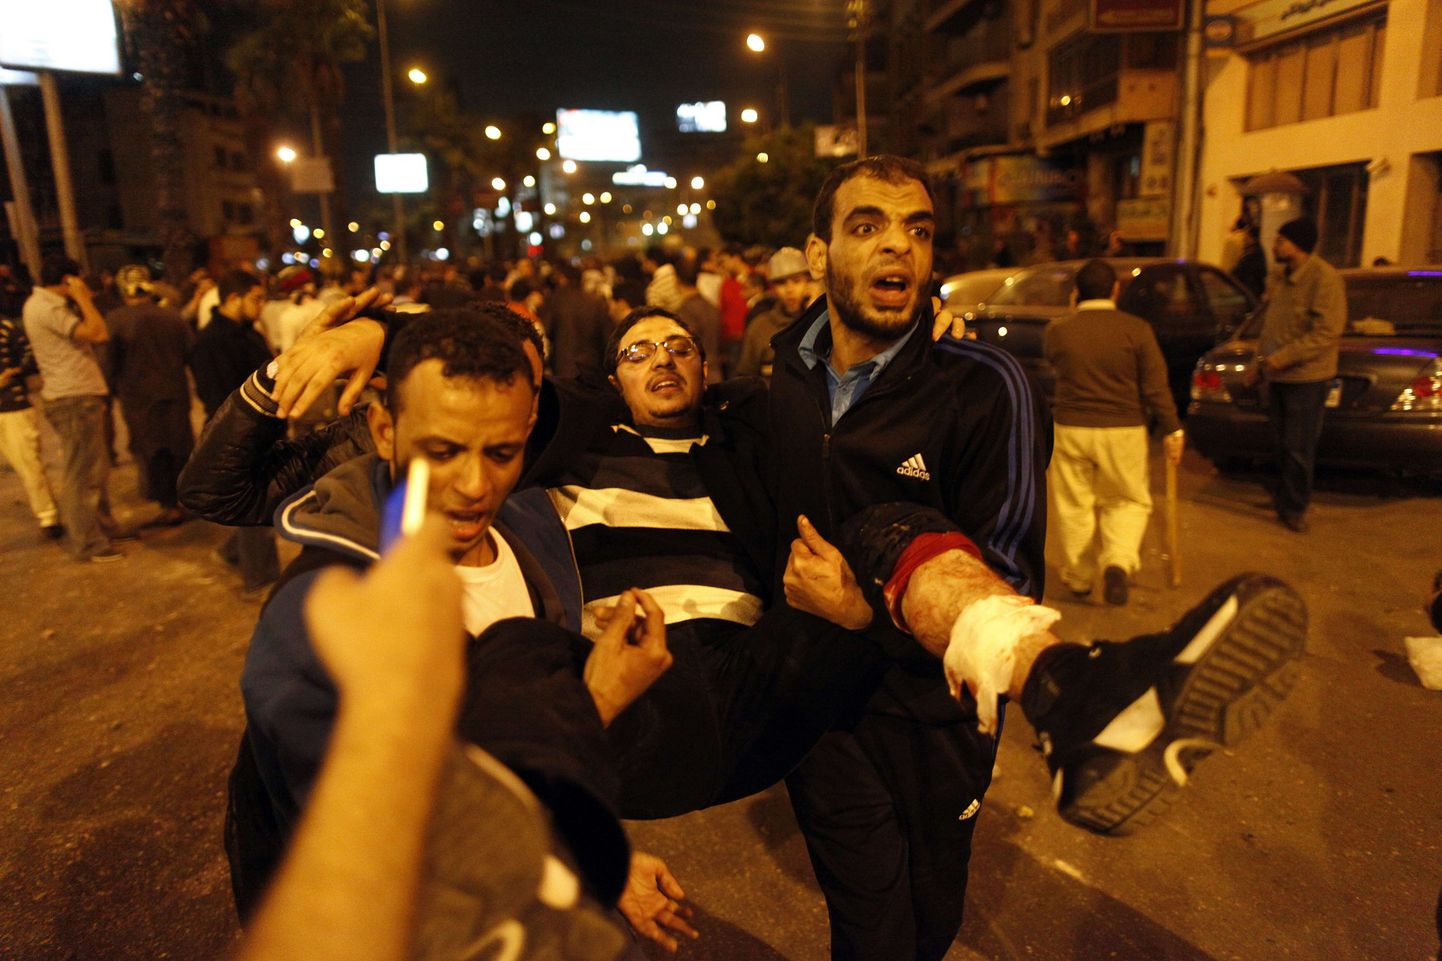 Members of the Muslim Brotherhood and supporters of Egyptian President Mohammed Morsi carry an injured comrade during clashes with anti-Morsi protestors on the road leading to the Egyptian presidential palace in Cairo on December 5, 2012. Supporters and opponents of Egypt's President Mohamed Morsi lobbed firebombs and rocks at each other as their standoff over his expanded powers and an Islamist-drafted constitution turned violent. AFP PHOTO/MAHMOUD KHALED